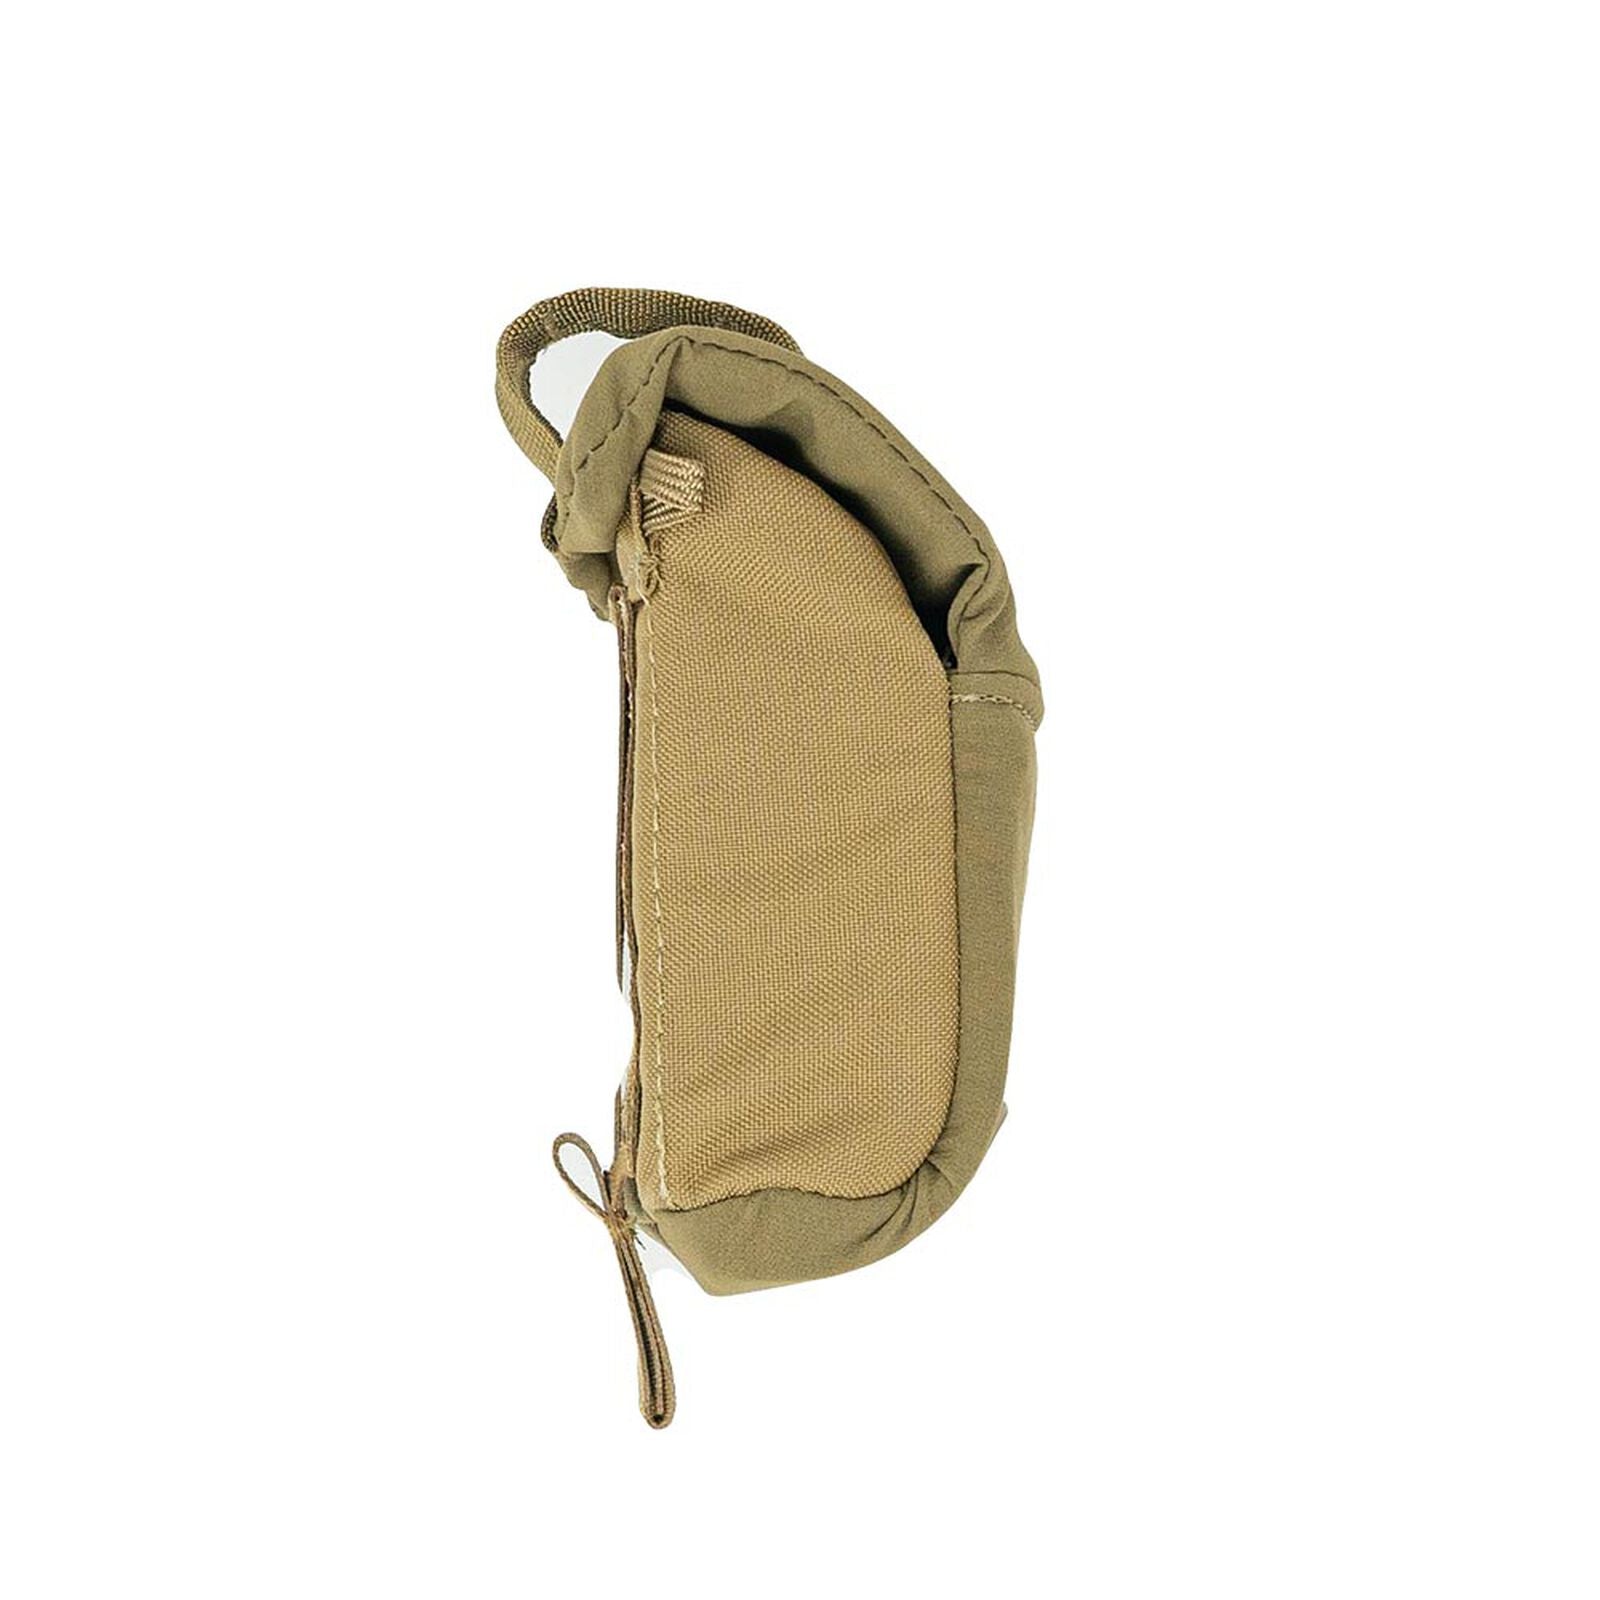 FHF Gear M1 Rangefinder Pouch Coyote side detail